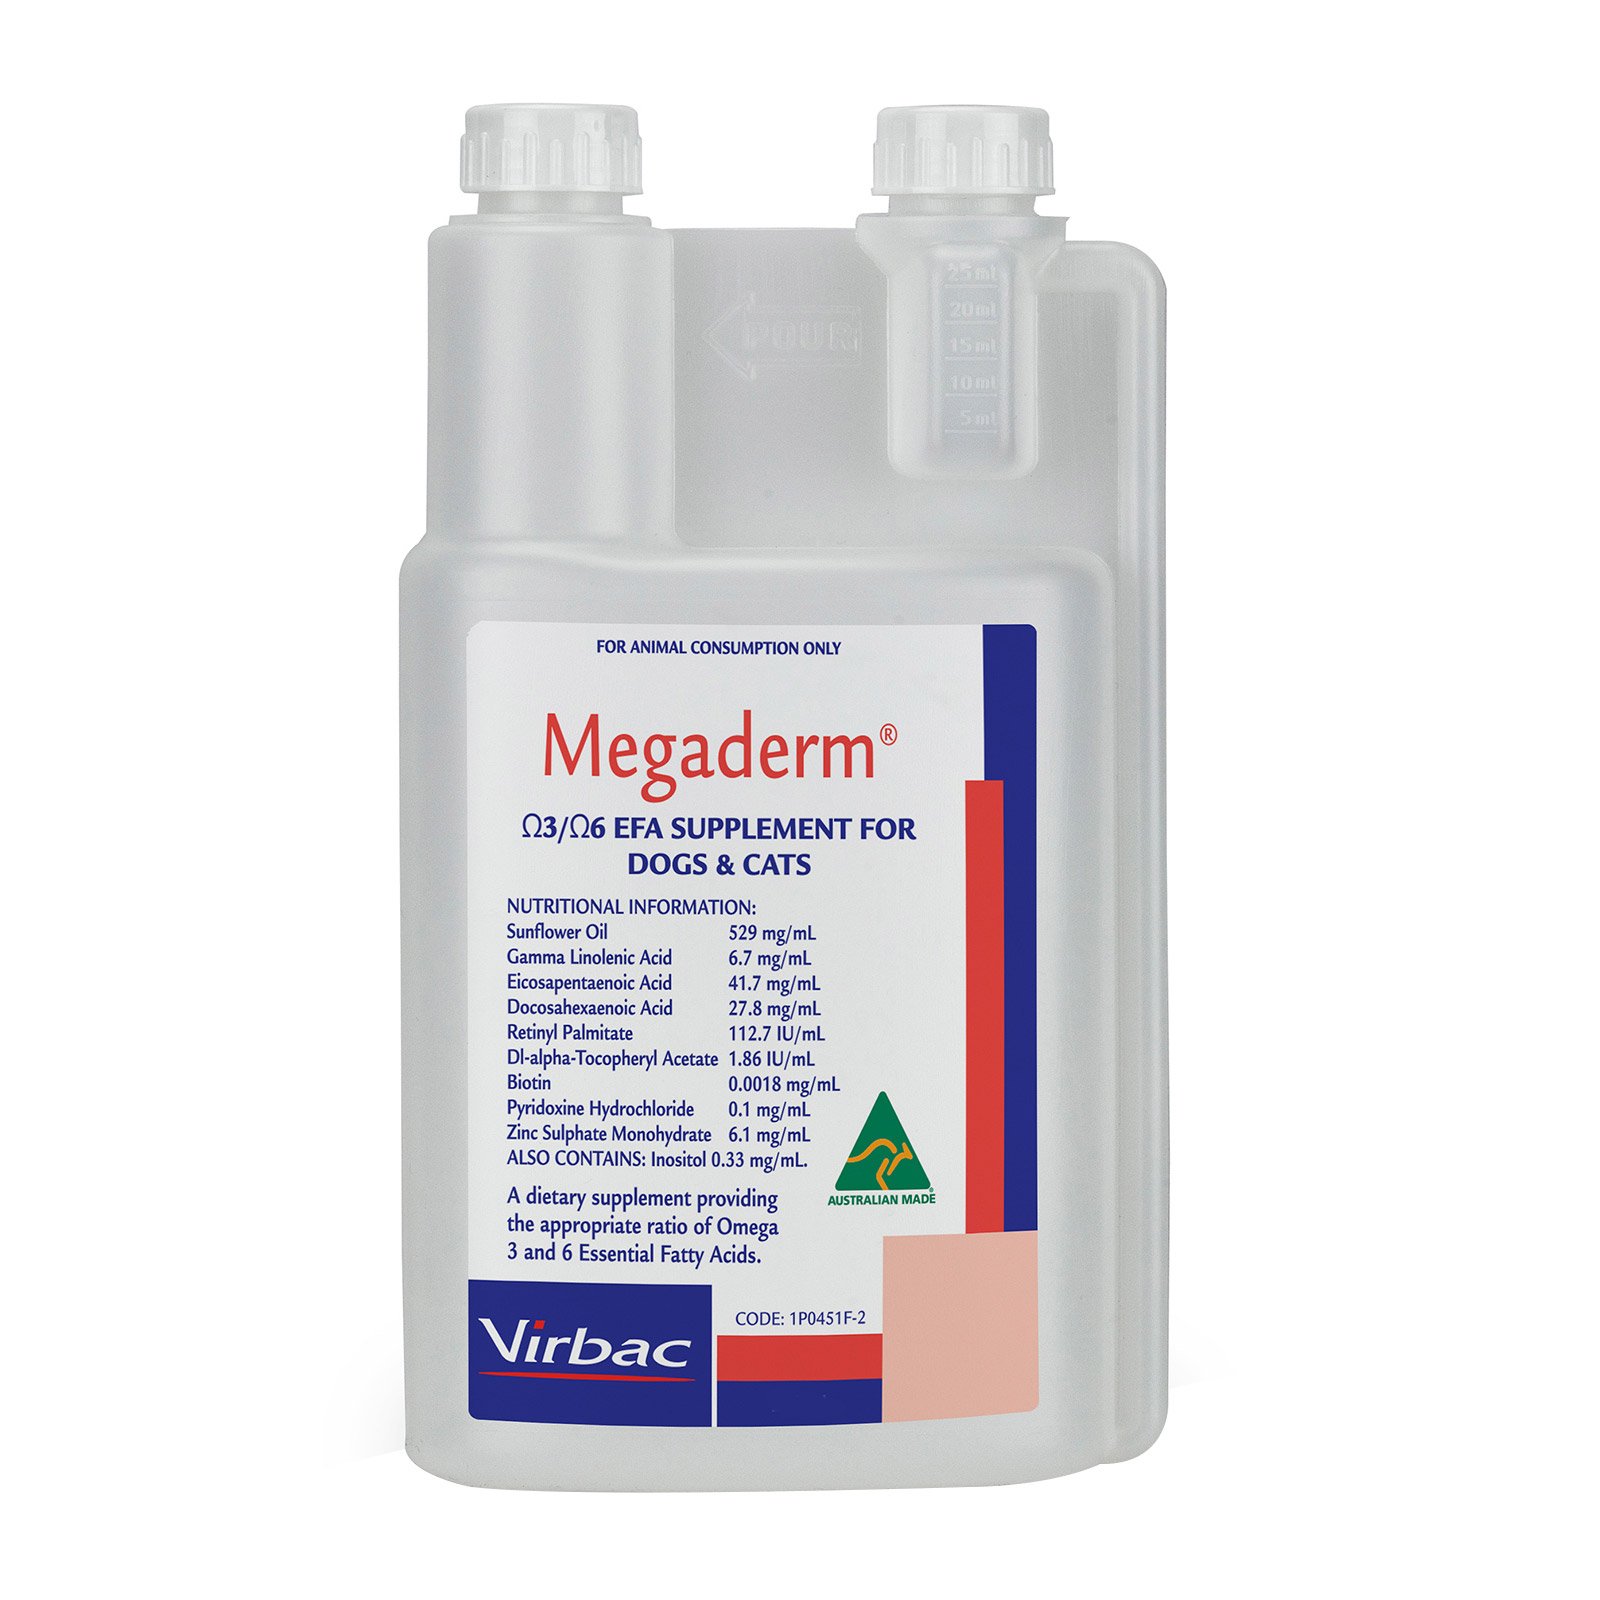 Megaderm Supplement for Dogs & Cats